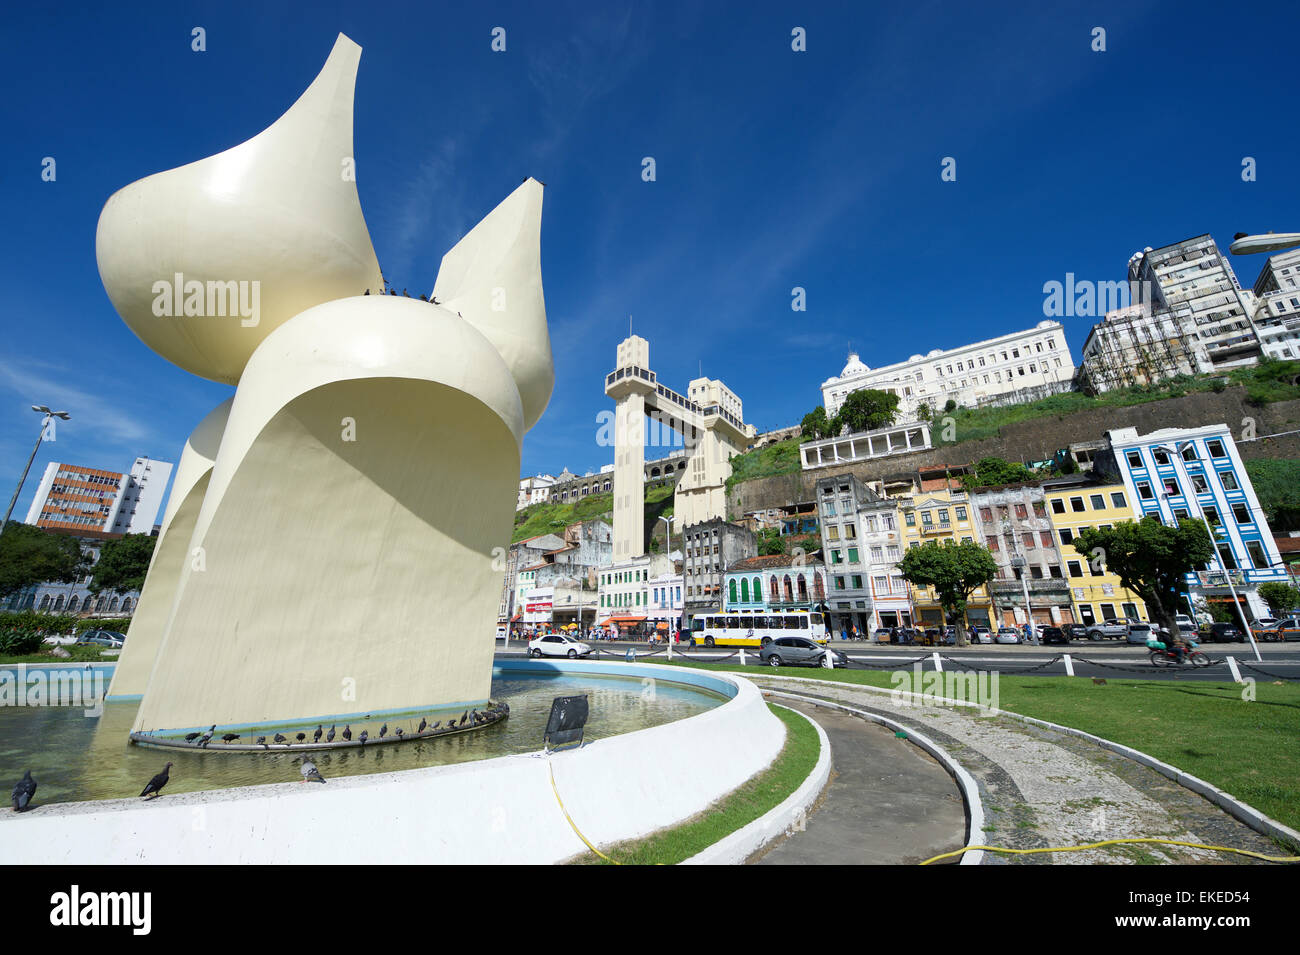 SALVADOR, BRAZIL - MARCH 12, 2015: Modern sculpture known locally as the " bunda" dominates the view of the city skyline Stock Photo - Alamy